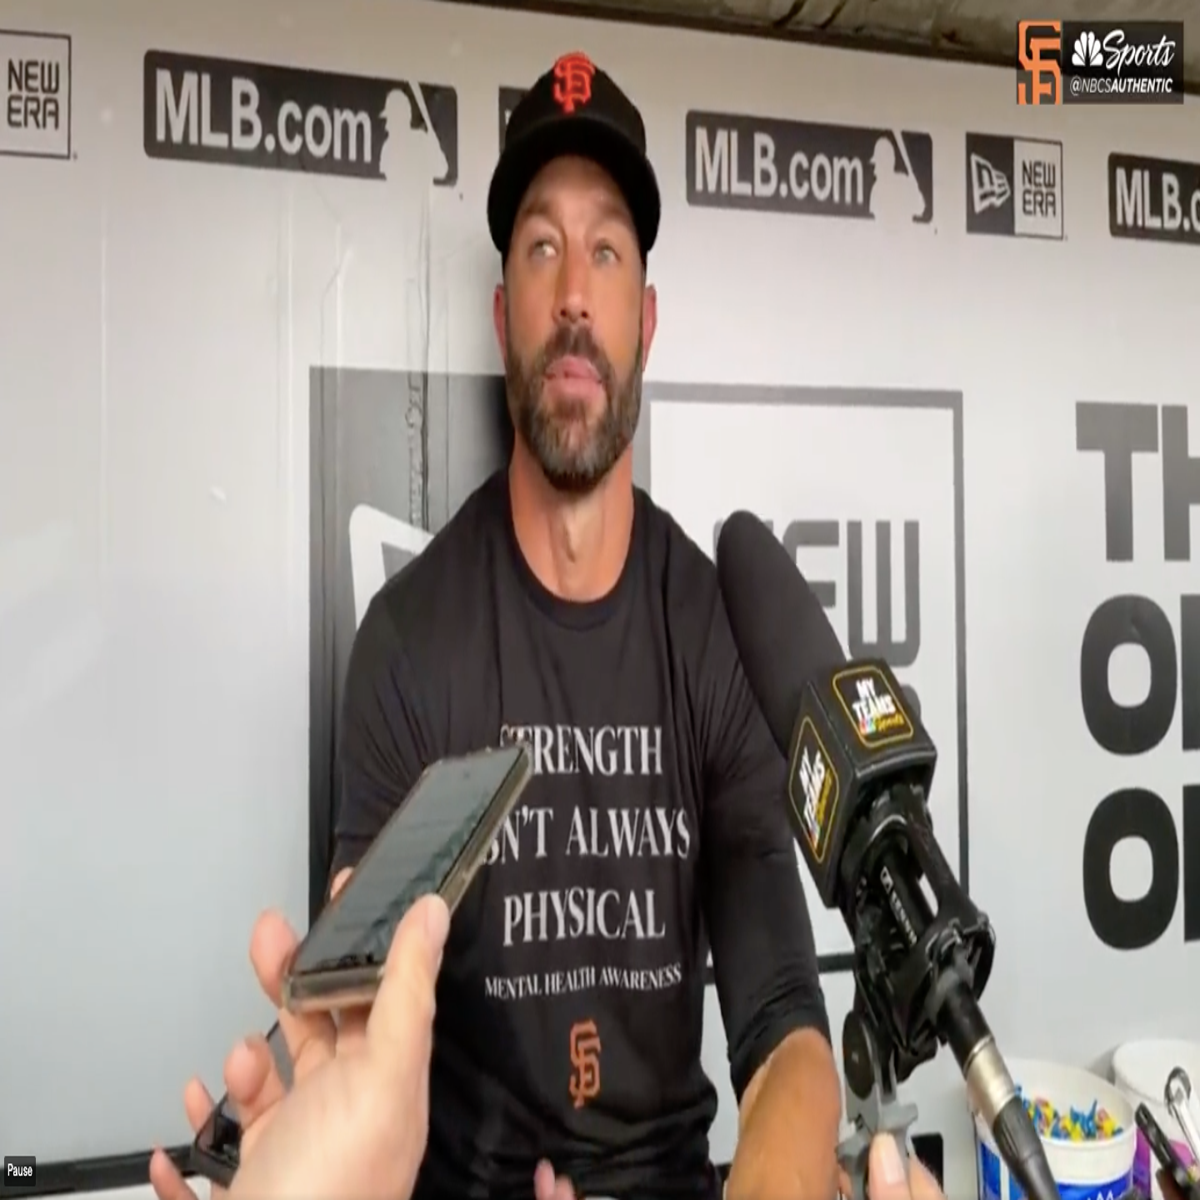 SF Giants Manager Says He Won't Be On Field For Anthem Until